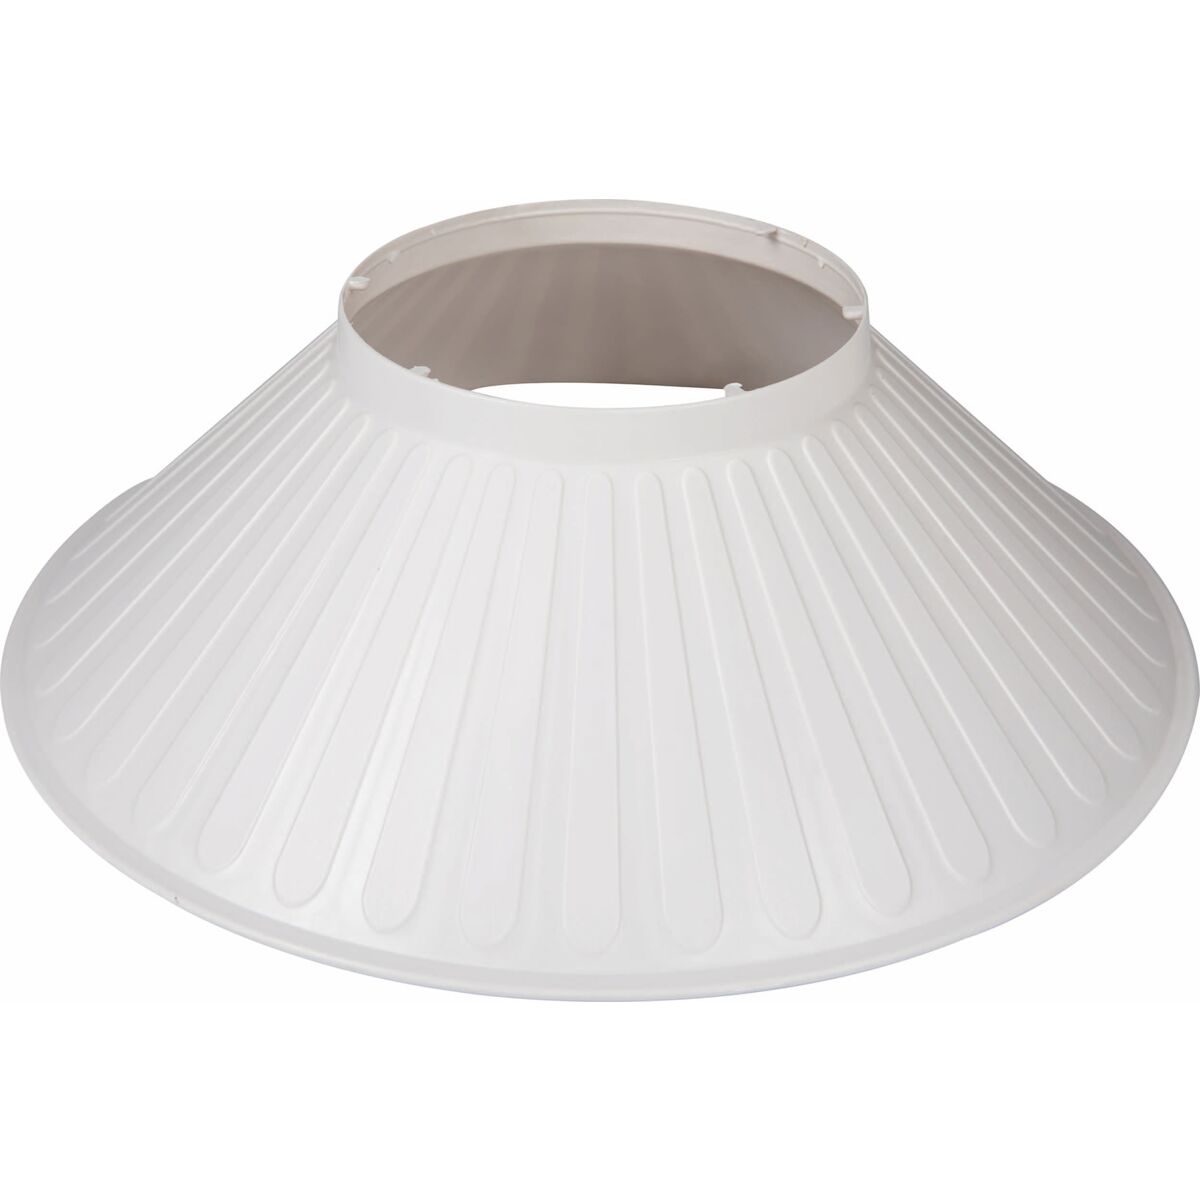 Tramontina shade for LED low bay light, 80 W